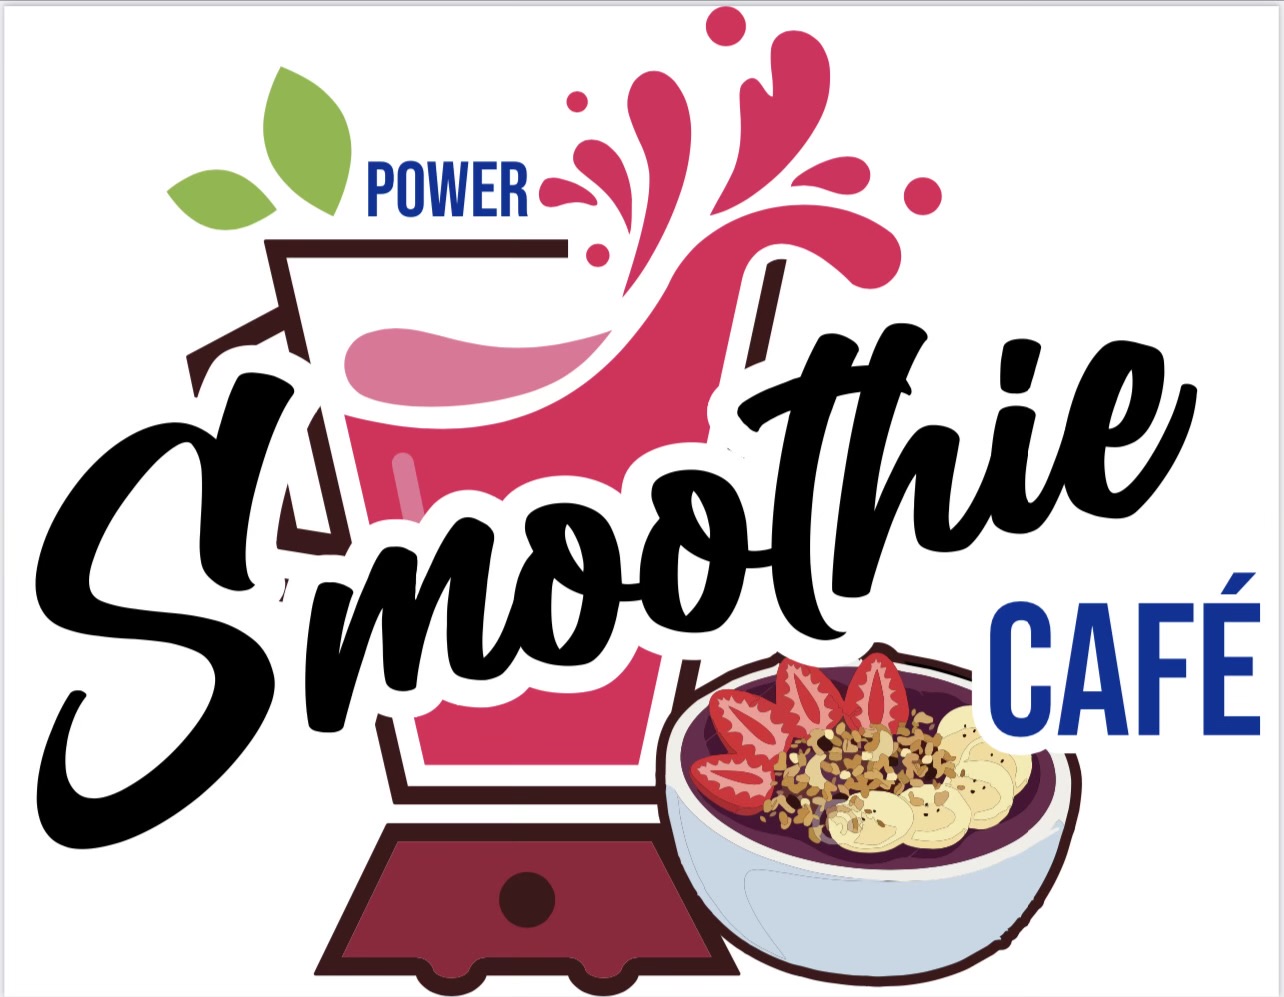 Power Smoothie Cafe